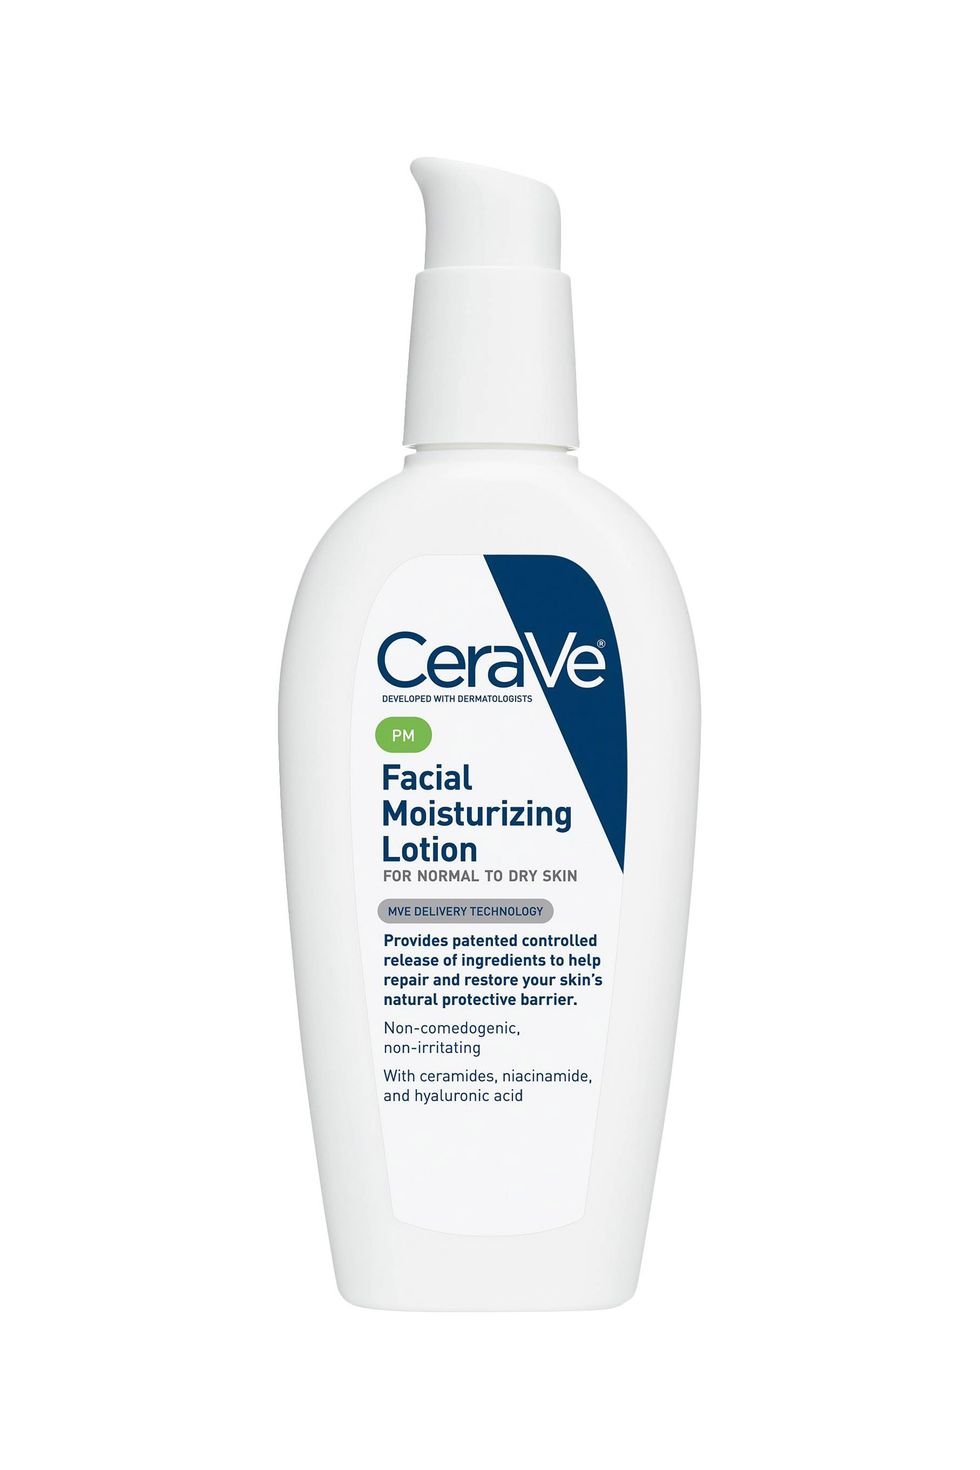 <p>I switched to mostly Cerave products for face and body lotion about a year ago and haven't looked back since. The price point is right and the stuff just works. I like the PM cream, which has a thinner formula that goes on lighter, versus the am which is thicker and has spf. I mix it with a little rose oil and I feel very fancy, like a beauty editor who knows things. — Leah Chernikoff, ELLE.com Editorial Director</p><p><em data-redactor-tag="em" data-verified="redactor">Cerave Moisturizing Facial Lotion PM,&nbsp;$8; <a href="https://www.amazon.com/CeraVe-Moisturizing-Facial-Lotion-Ounce/dp/B00365DABC?th=1">amazon.com</a></em></p>